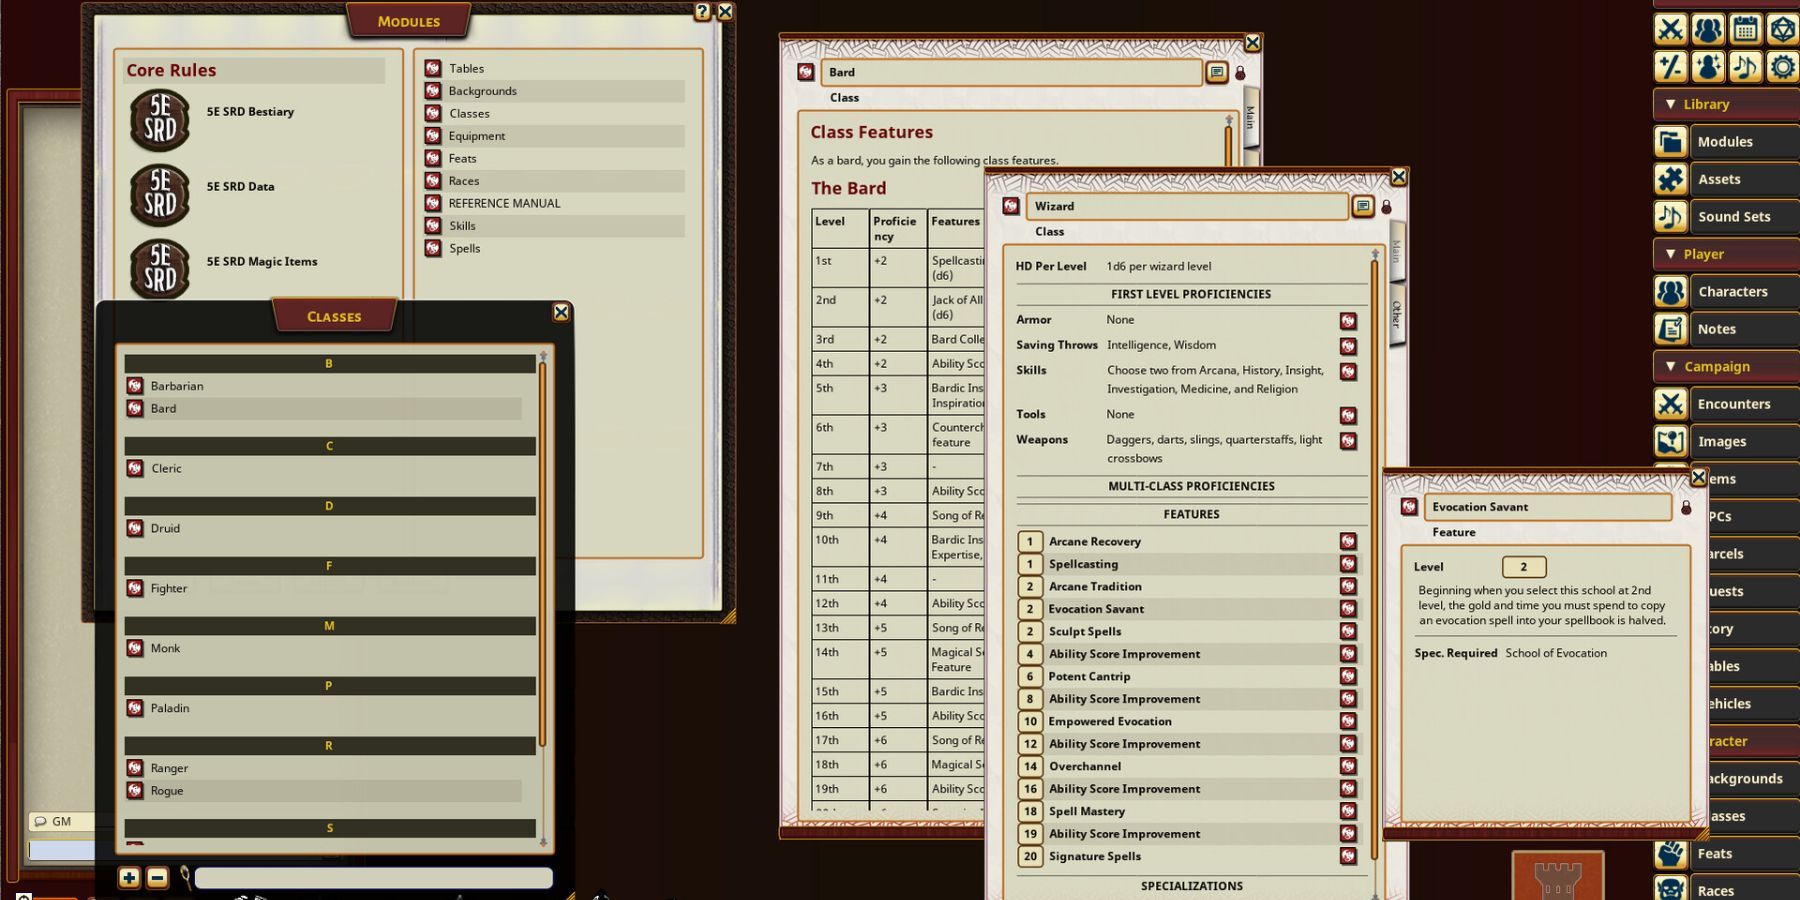 Fantasy Grounds interface